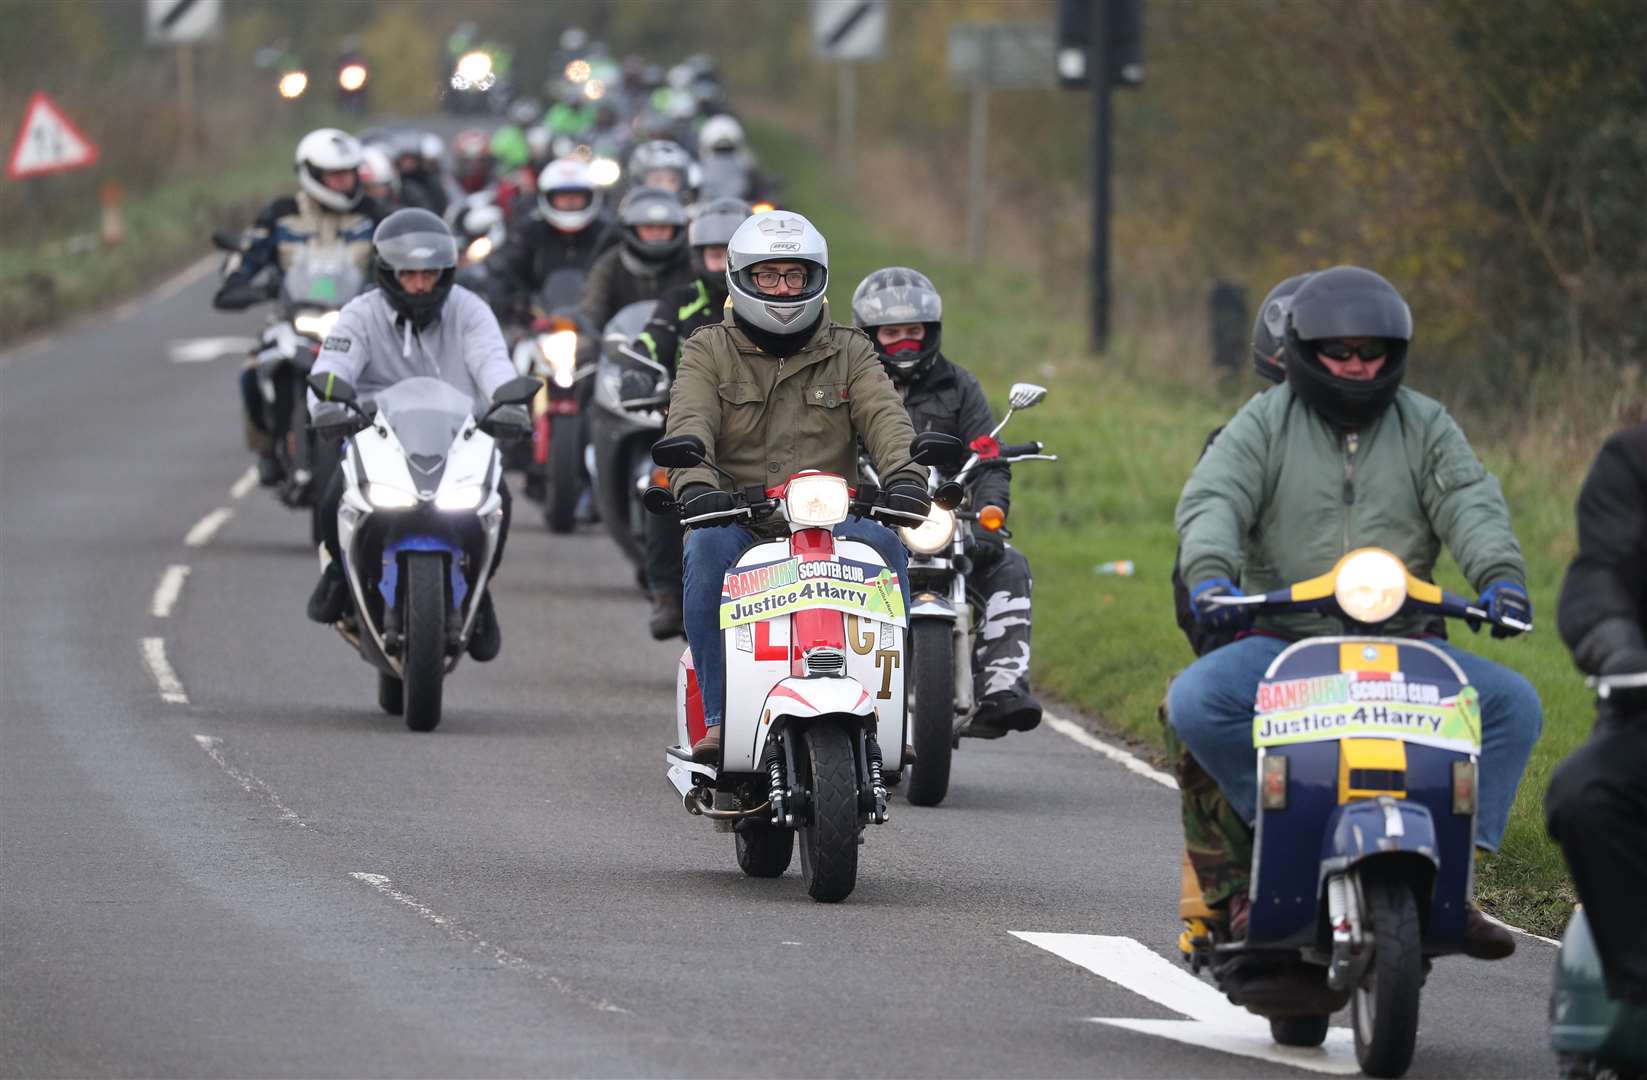 A motorbike convoy follows Harry Dunn’s last ride in Brackley as a tribute to the teenager (Andrew Matthews/PA)